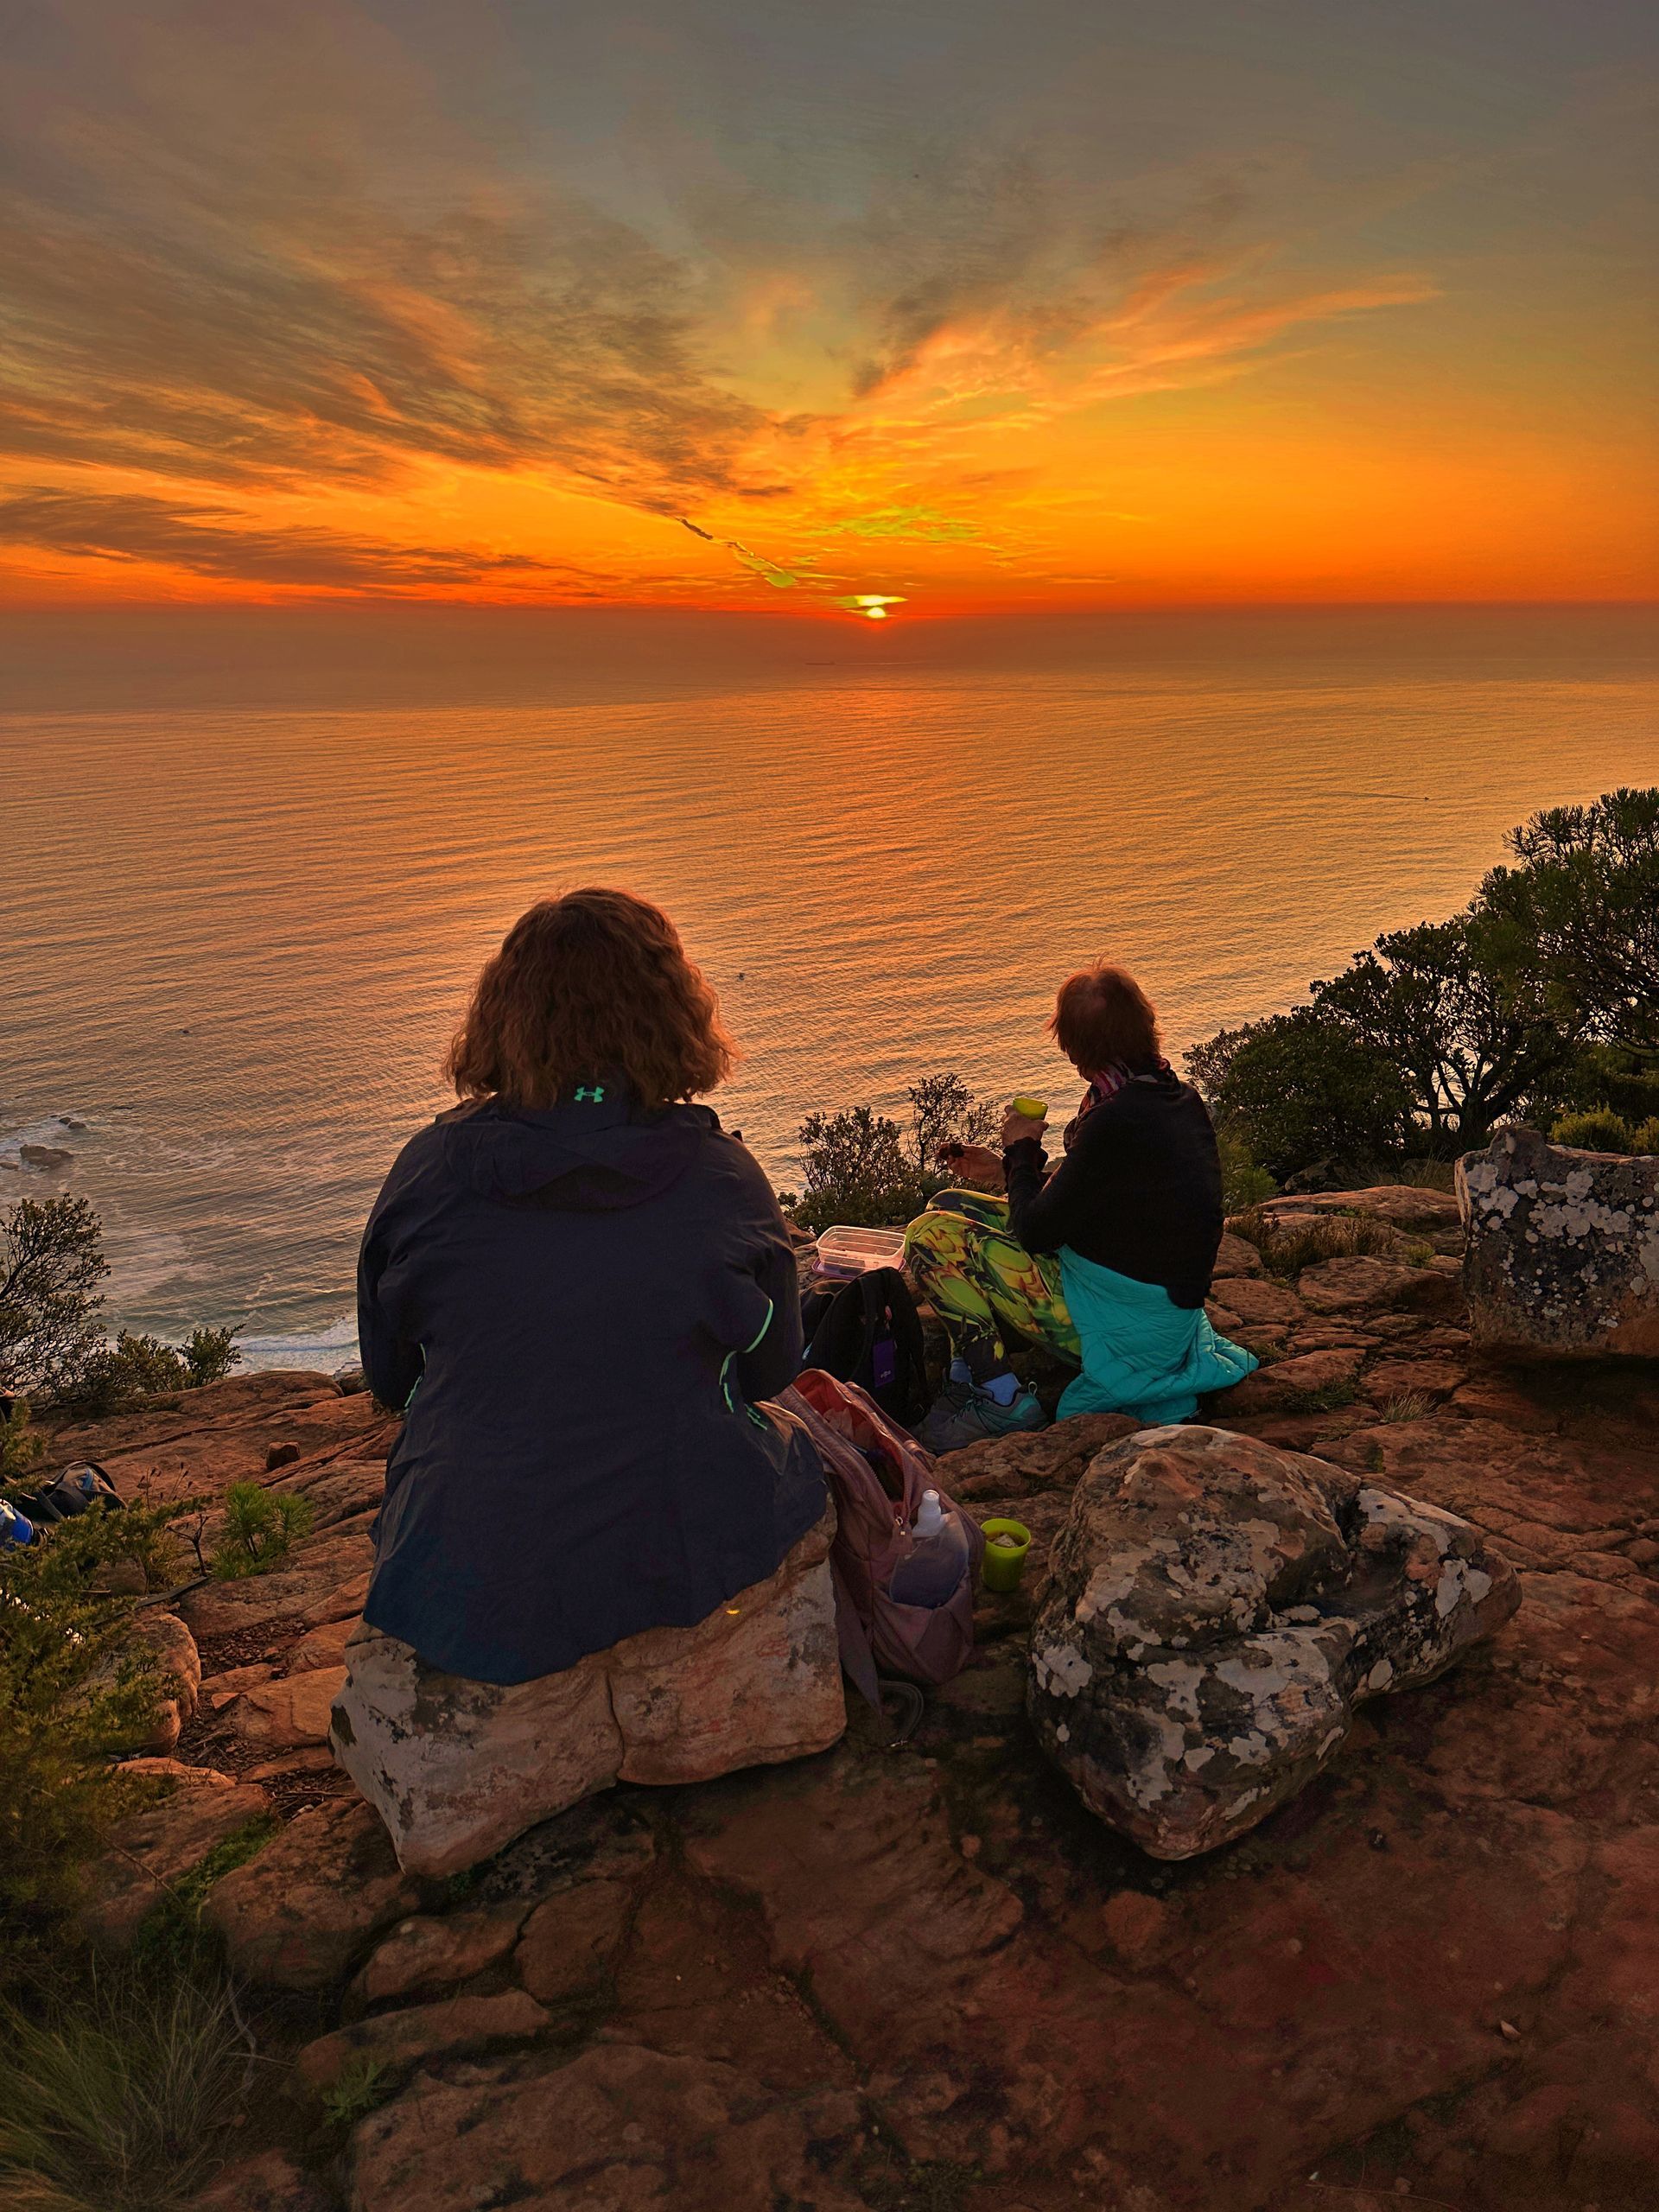 Image Description:  A breathtaking view of Lions Head hike during sunset. The image is taken from th